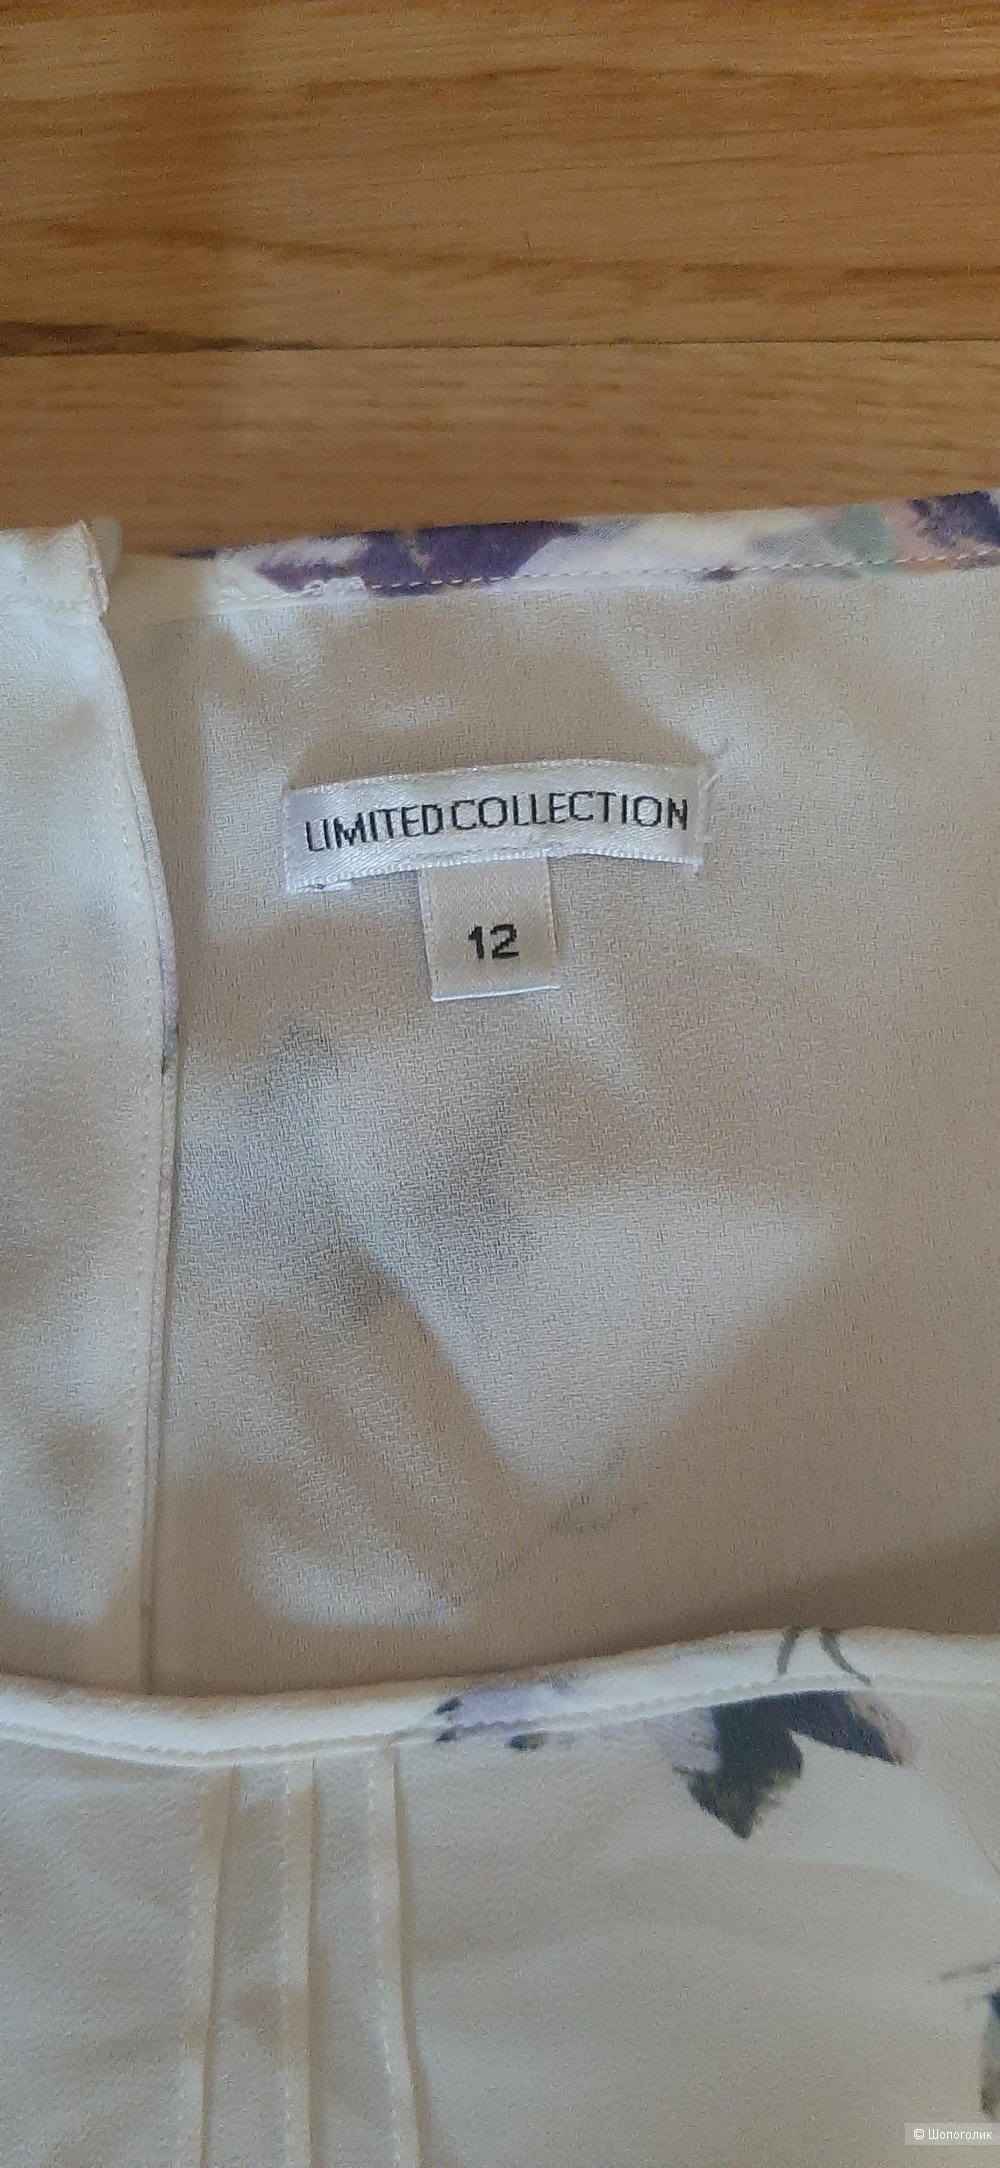 Платье Limited Collection М S